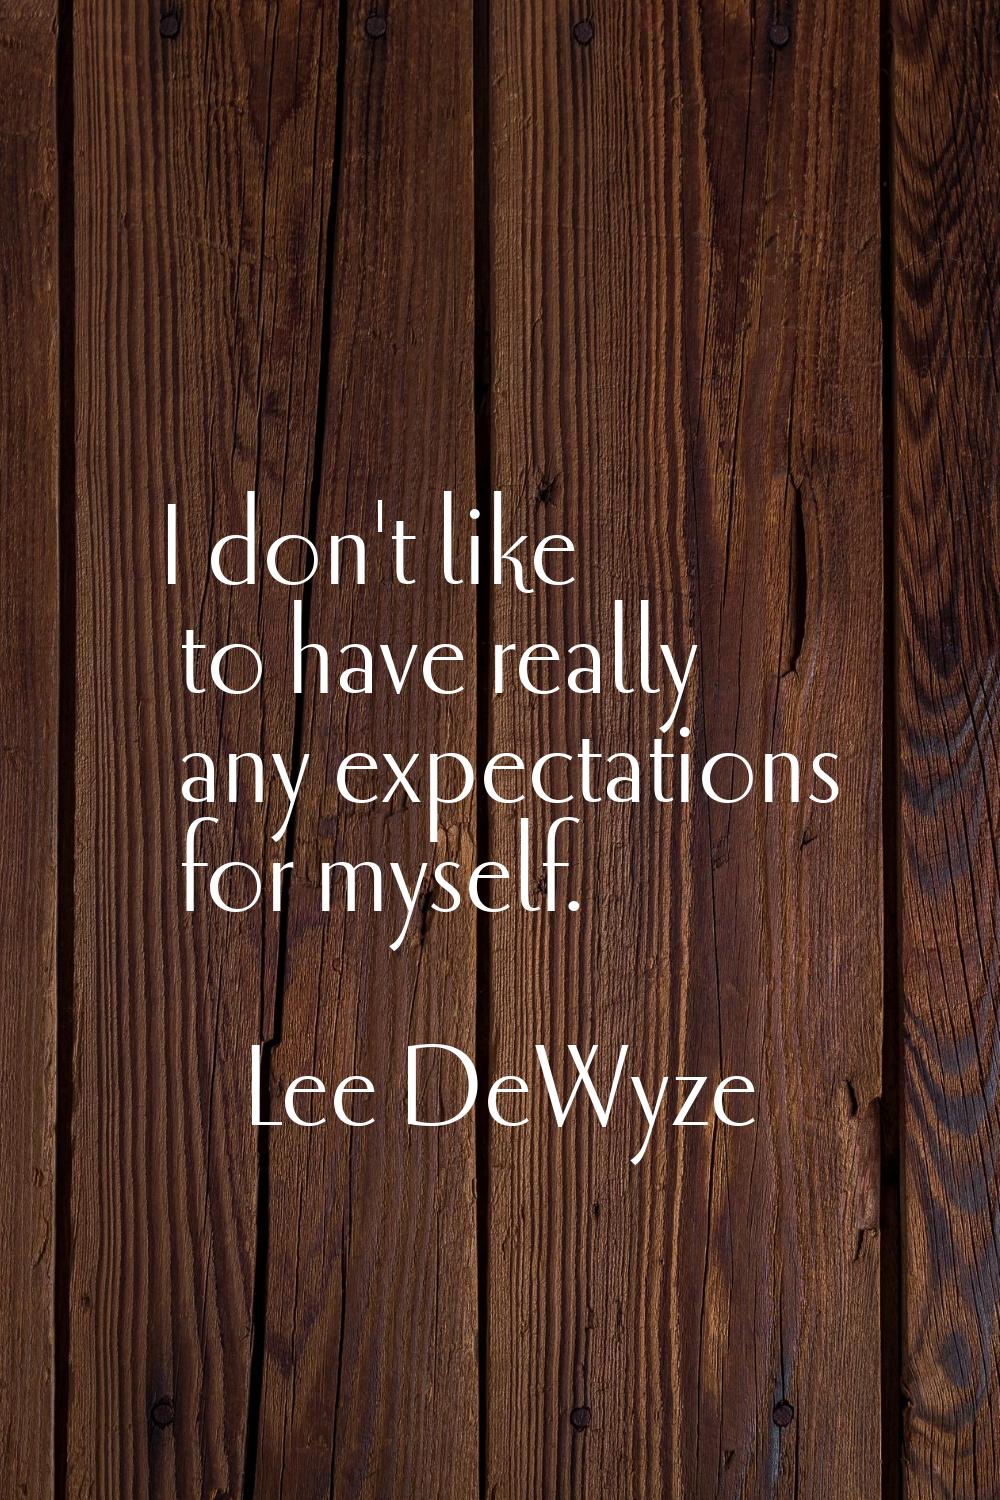 I don't like to have really any expectations for myself.